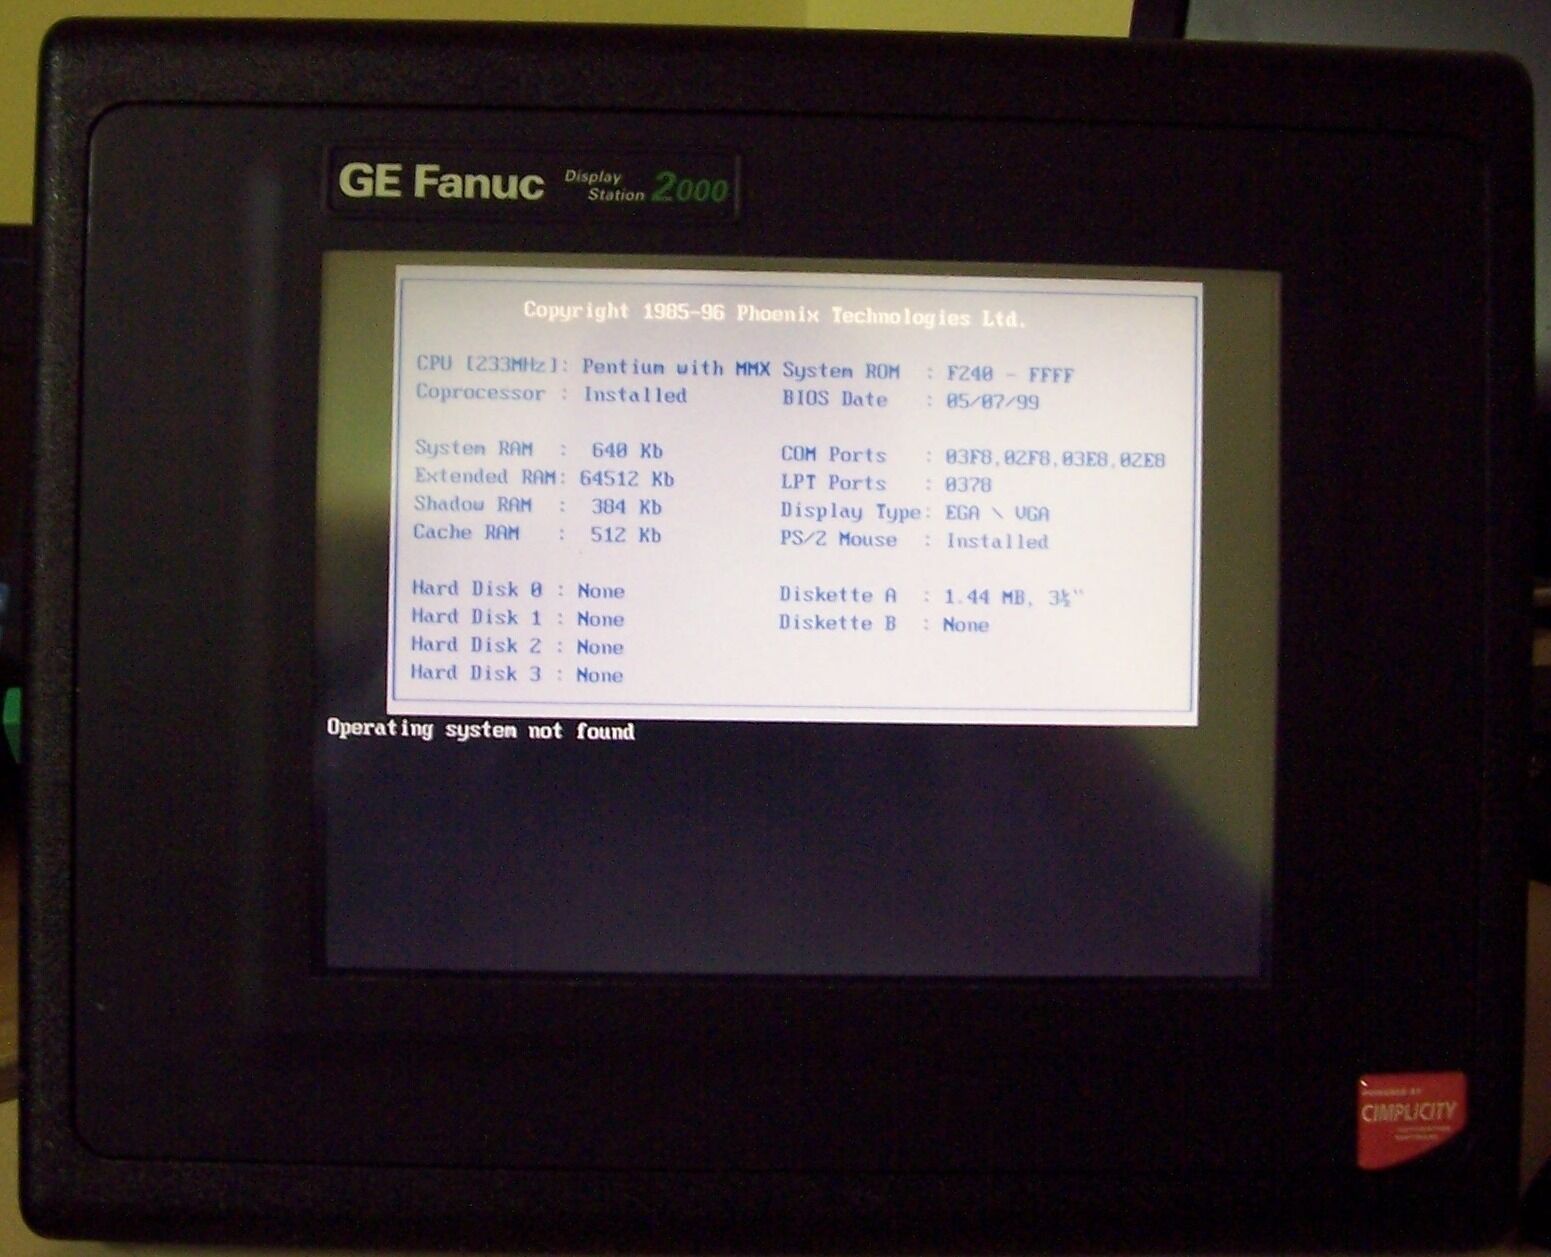 GE Fanuc Display Station 2000. IC752WTE000D (our ref 1133)